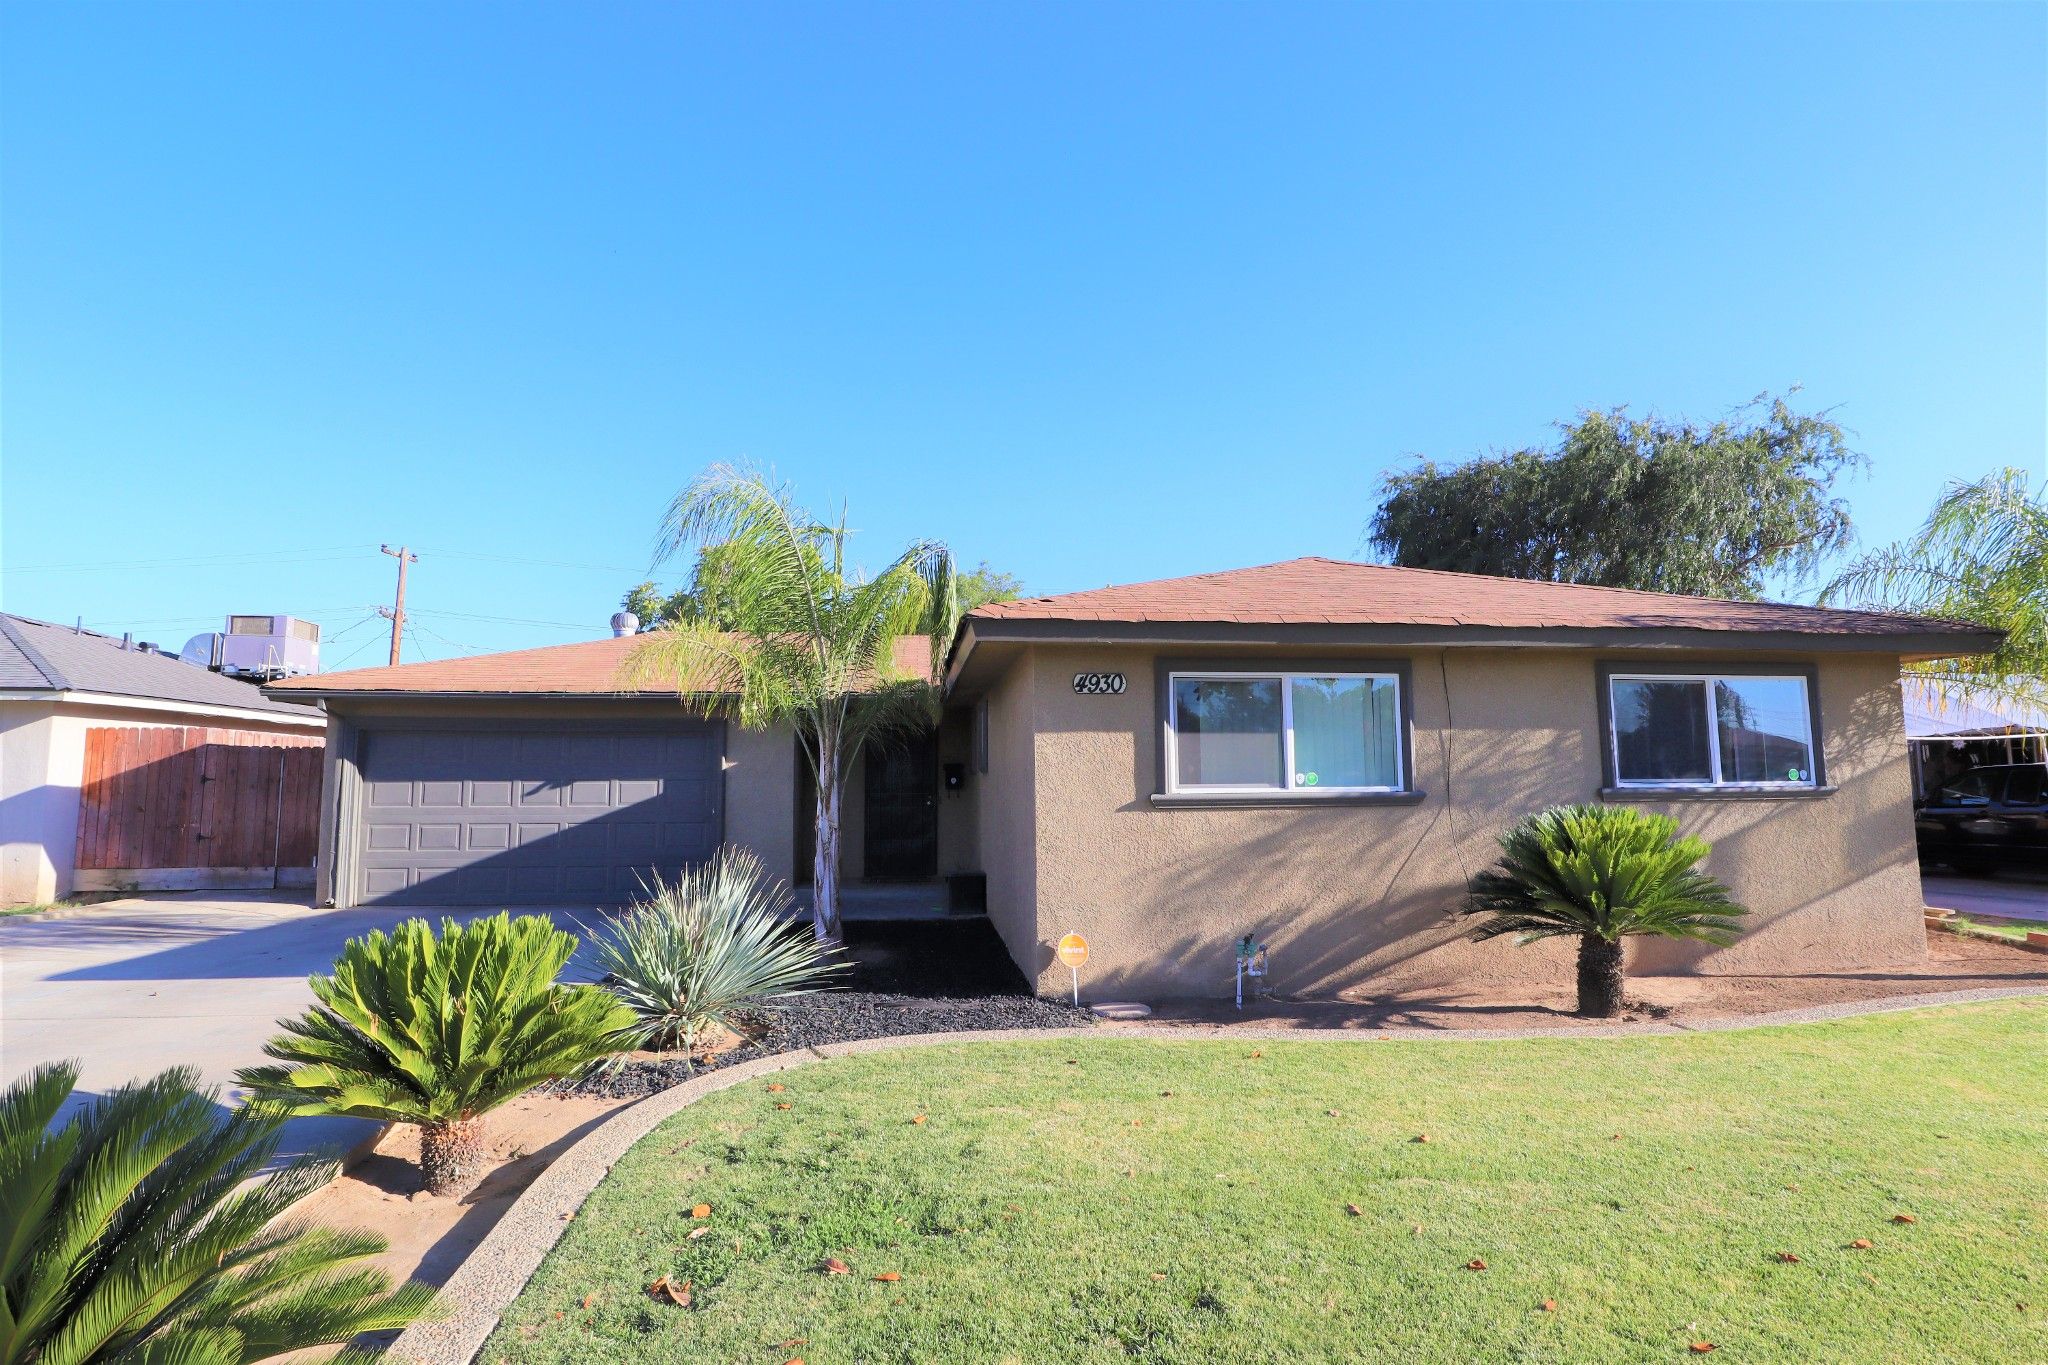 Main Photo: 4930 E Weathermaker Ave, Fresno, CA 93727-1957 in Fresno: Residential for sale : MLS®# 561523